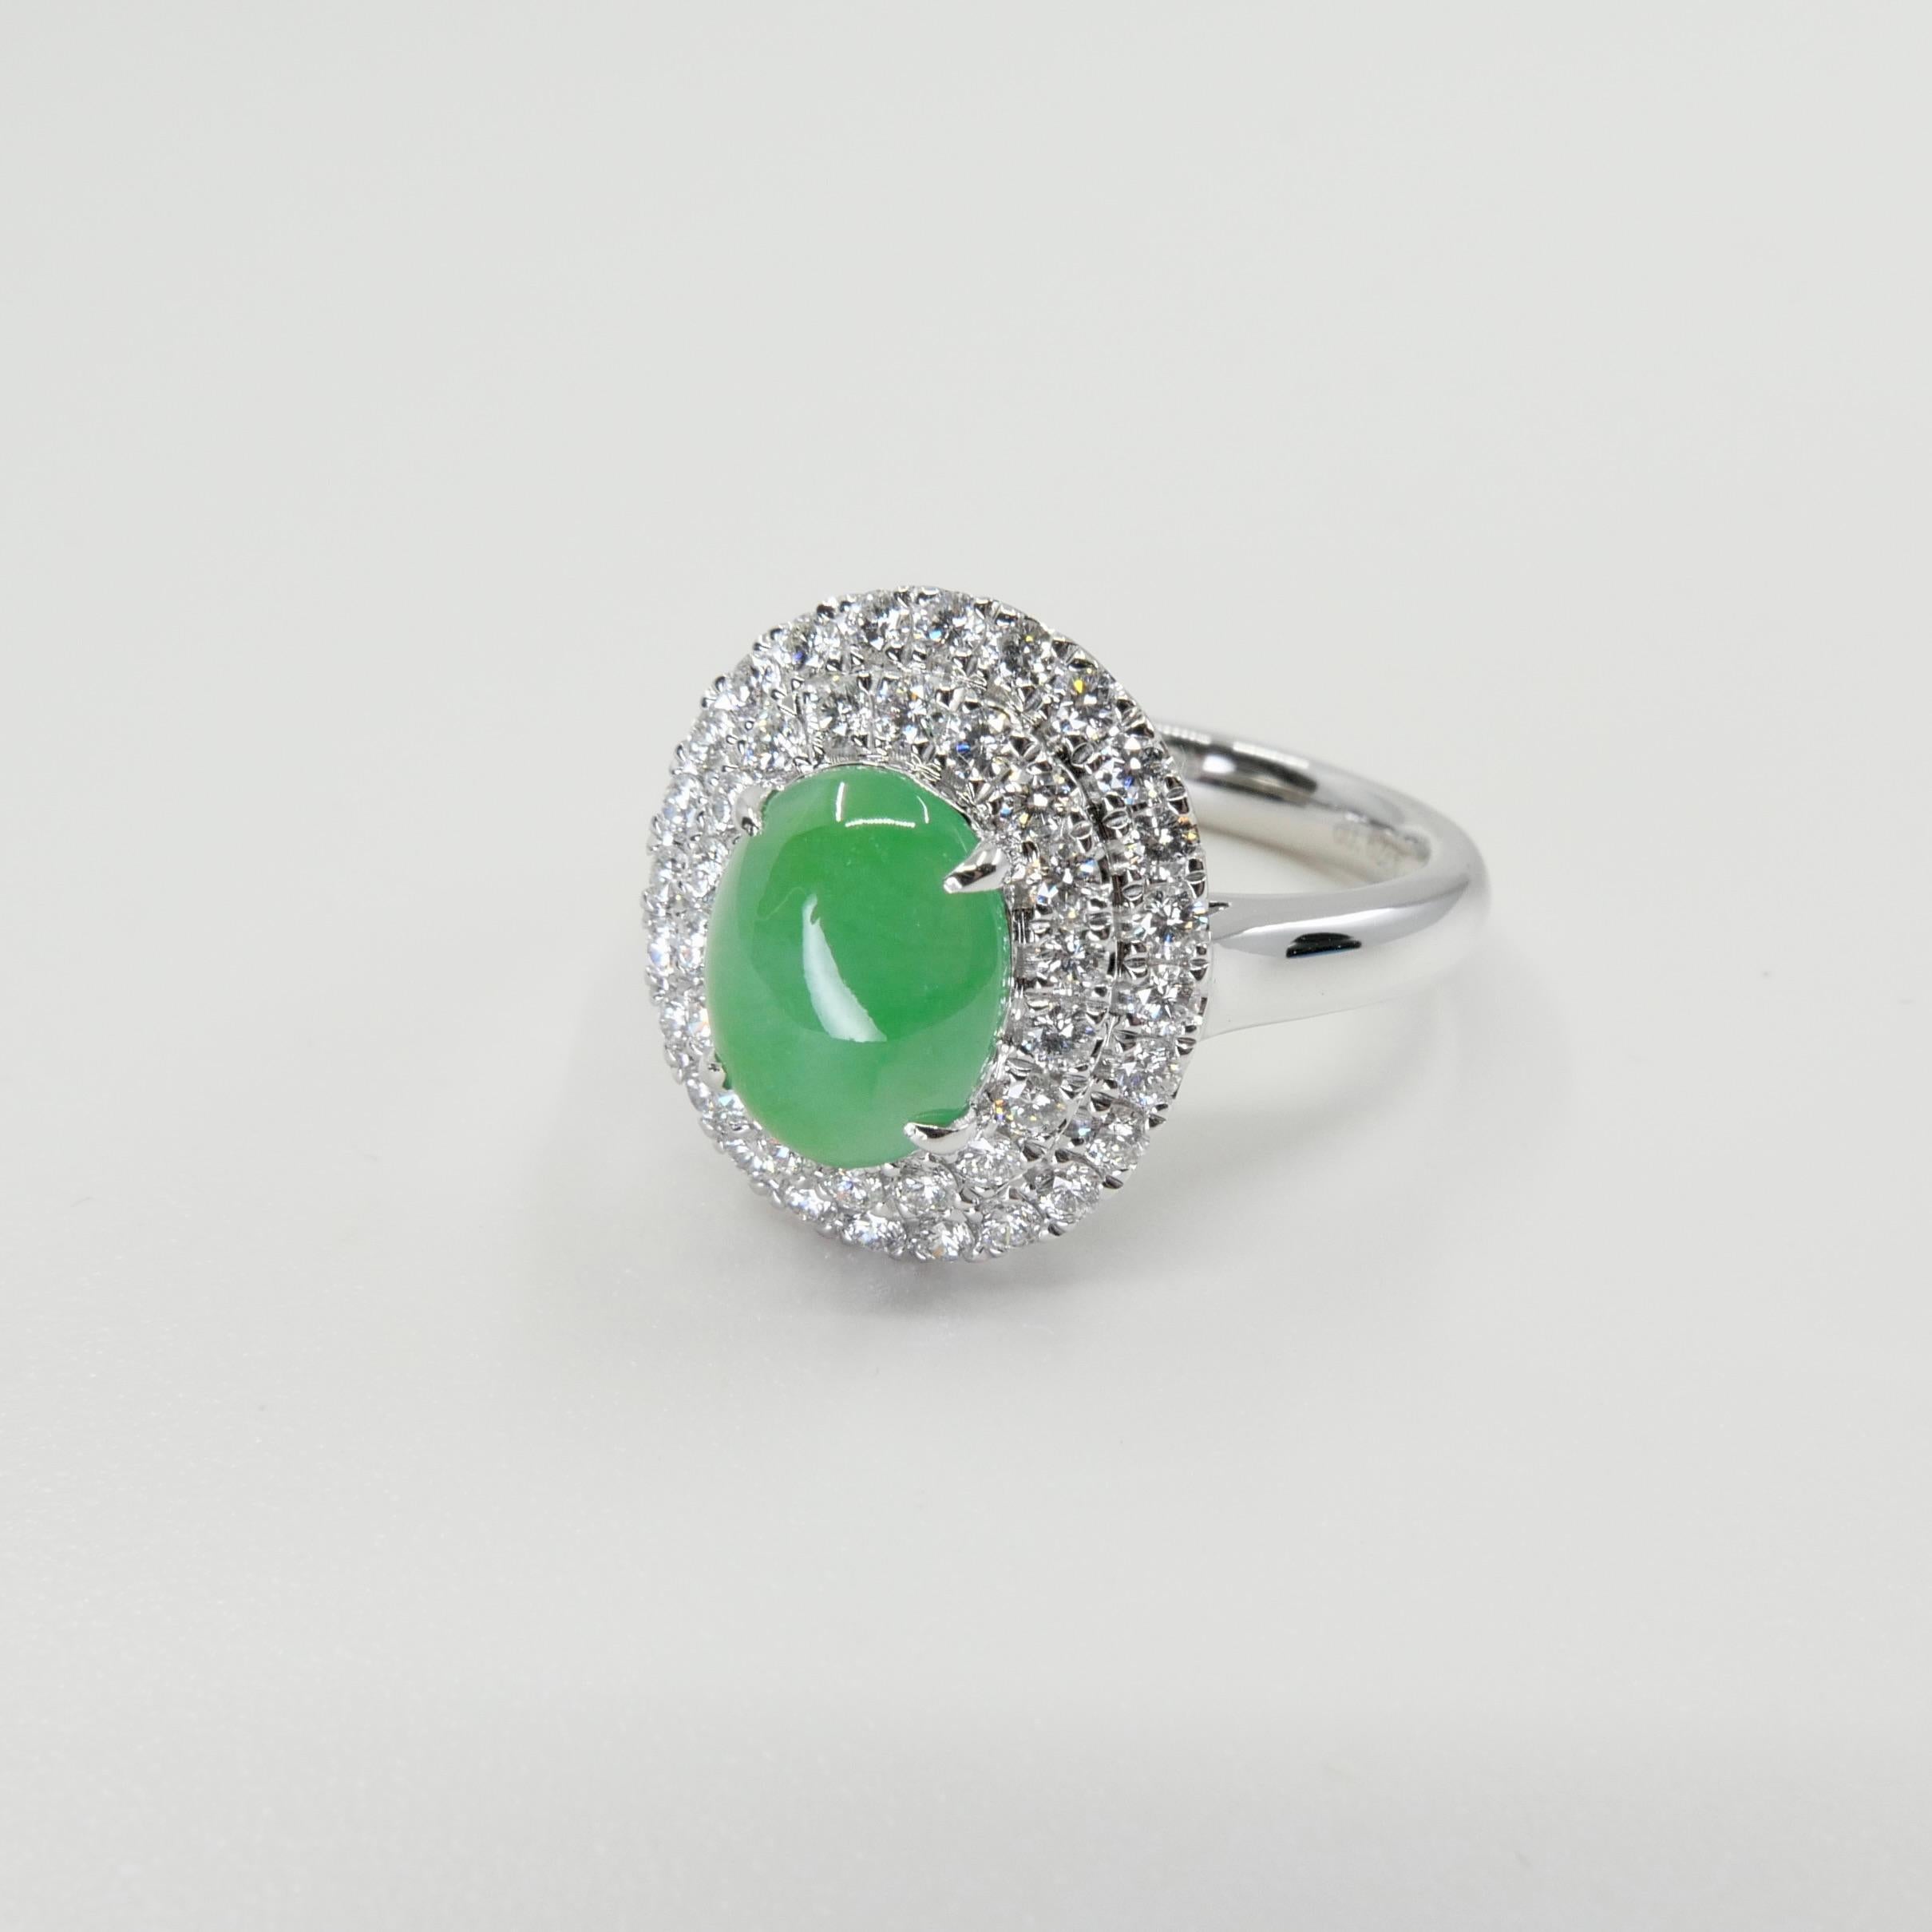 Cabochon Certified 1.59 Carat Natural Jade & Diamond Cocktail Ring, Apple Green Color For Sale